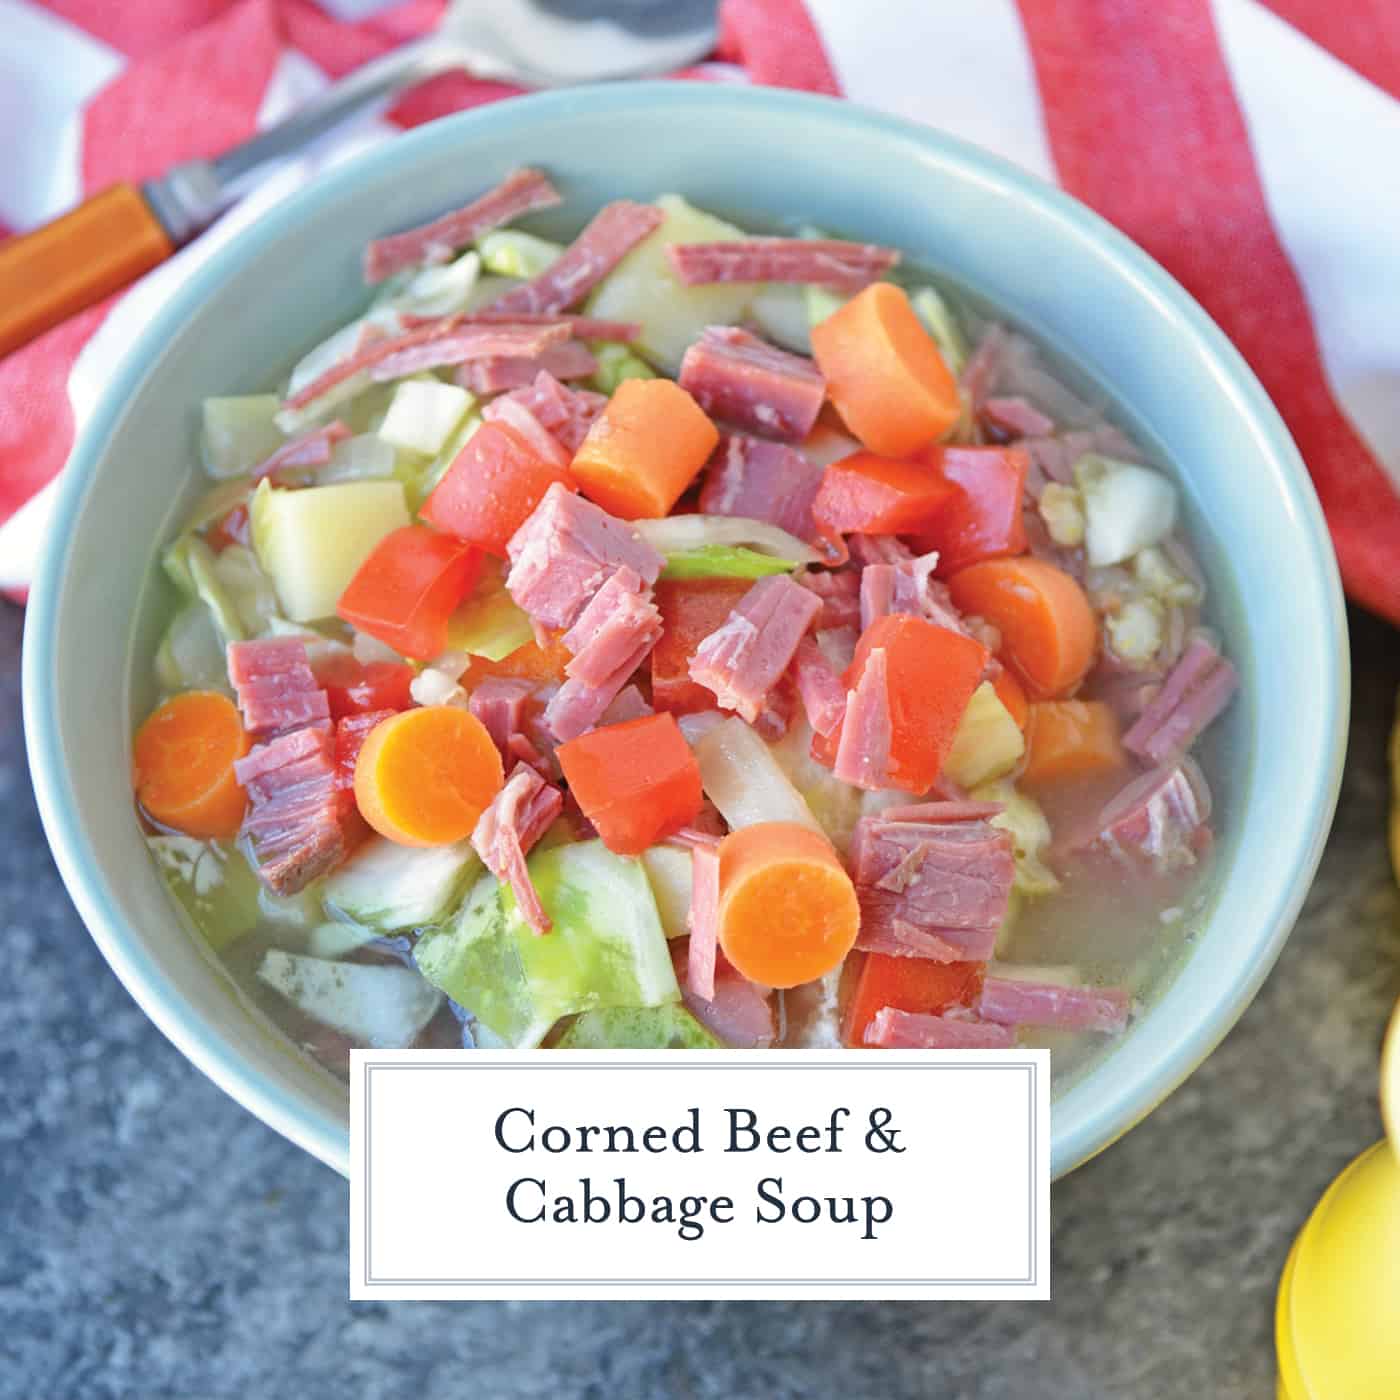 Leftover Corned Beef and Cabbage Soup is the best way to make another full meal from your Irish feast packed with vibrant veggies and seasoning. #cornedbeefsoup #leftovercornedbeefrecipes #easysouprcipes www.savoryexperiments.com 